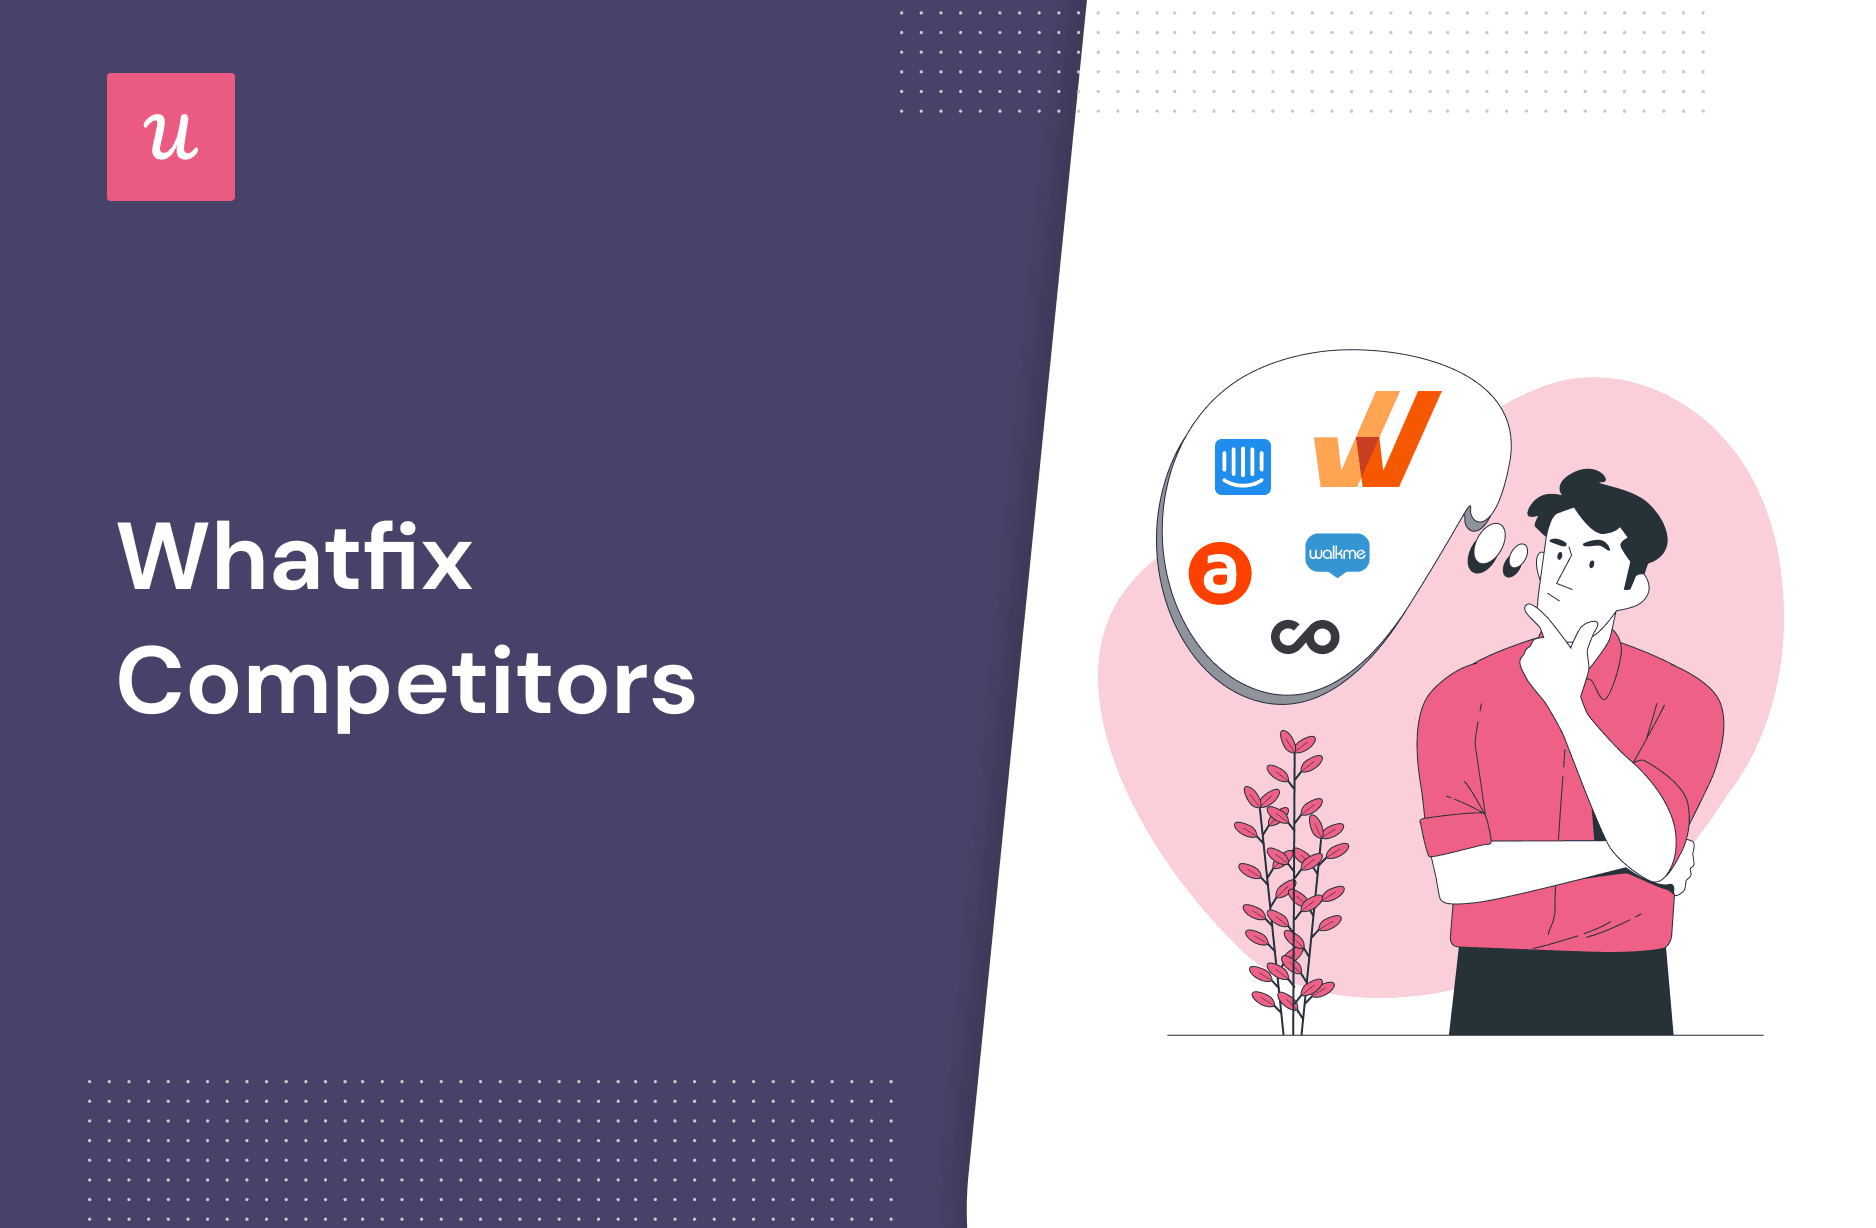 Best Whatfix Competitors in 2022 - Compare Features, Pricing and Reviews cover